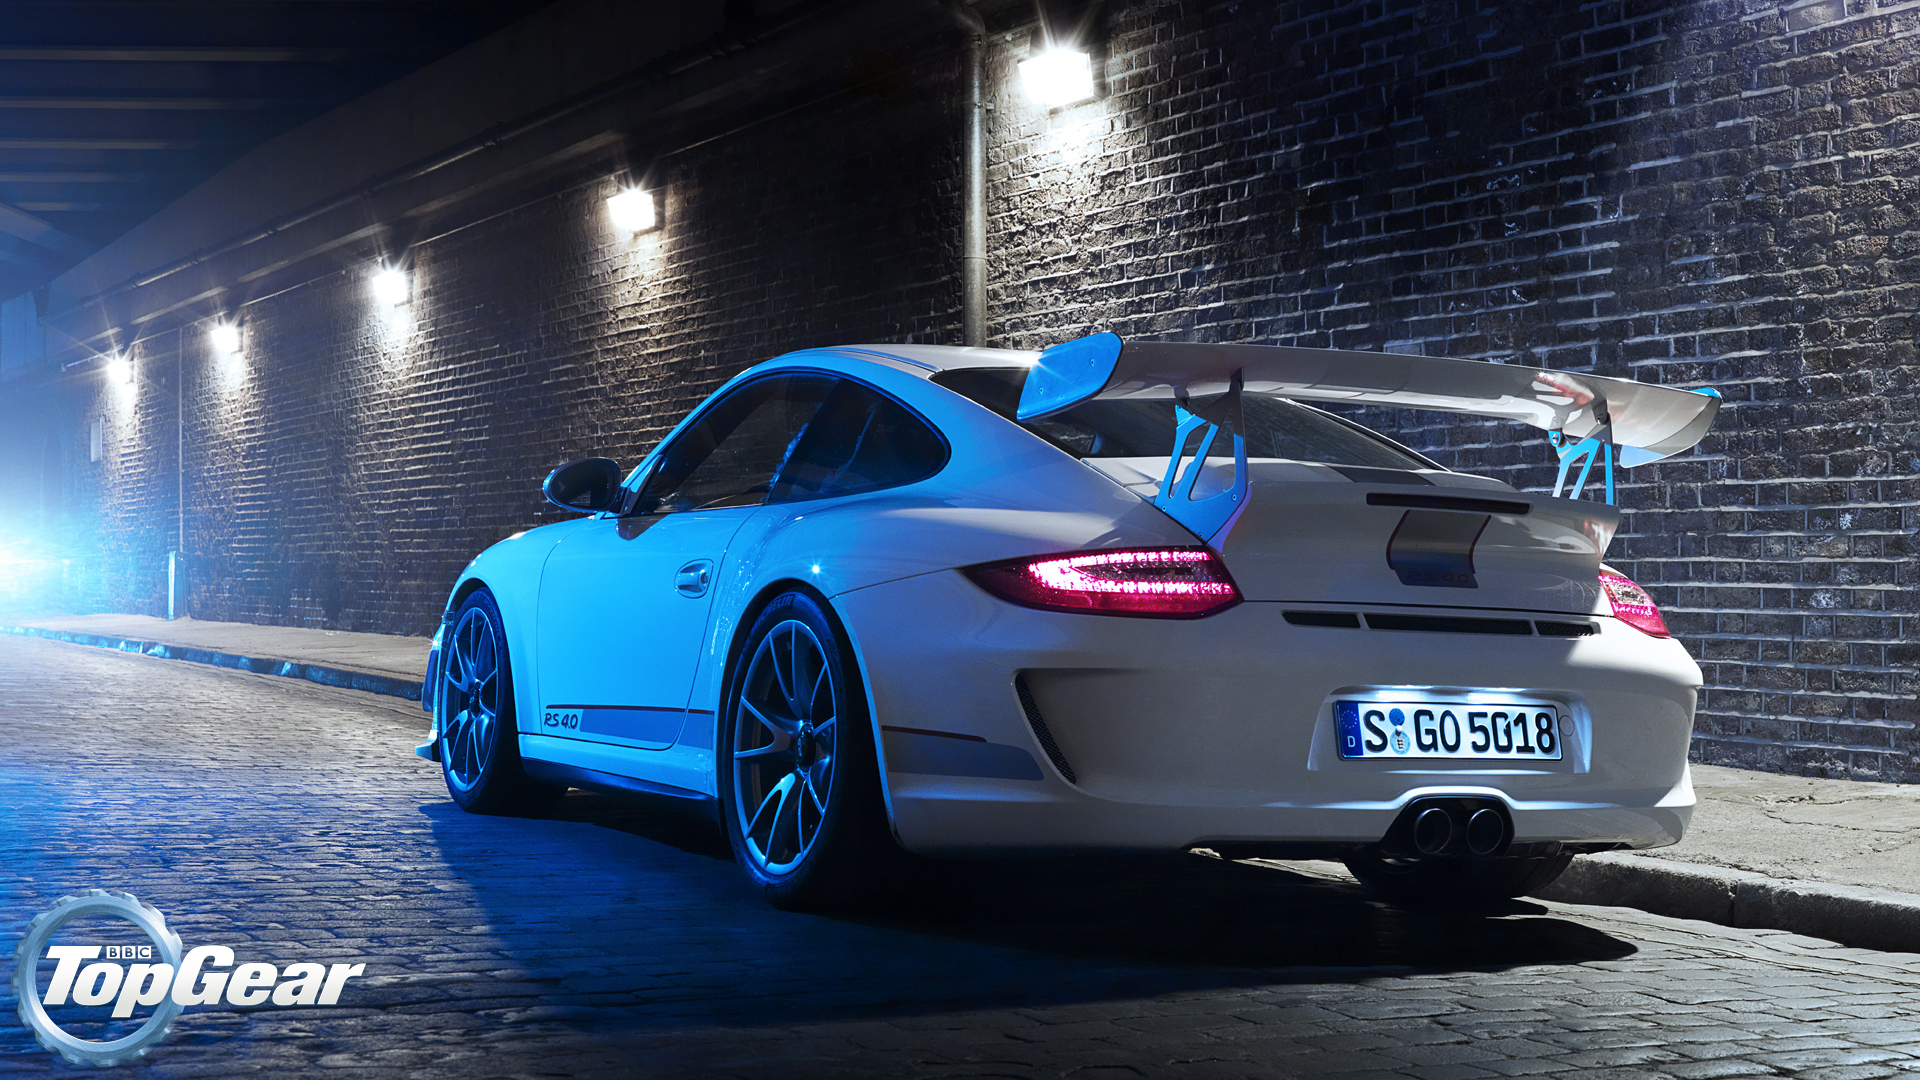 1920x1080 Images Porsche 911 Top Gear White Back view night time